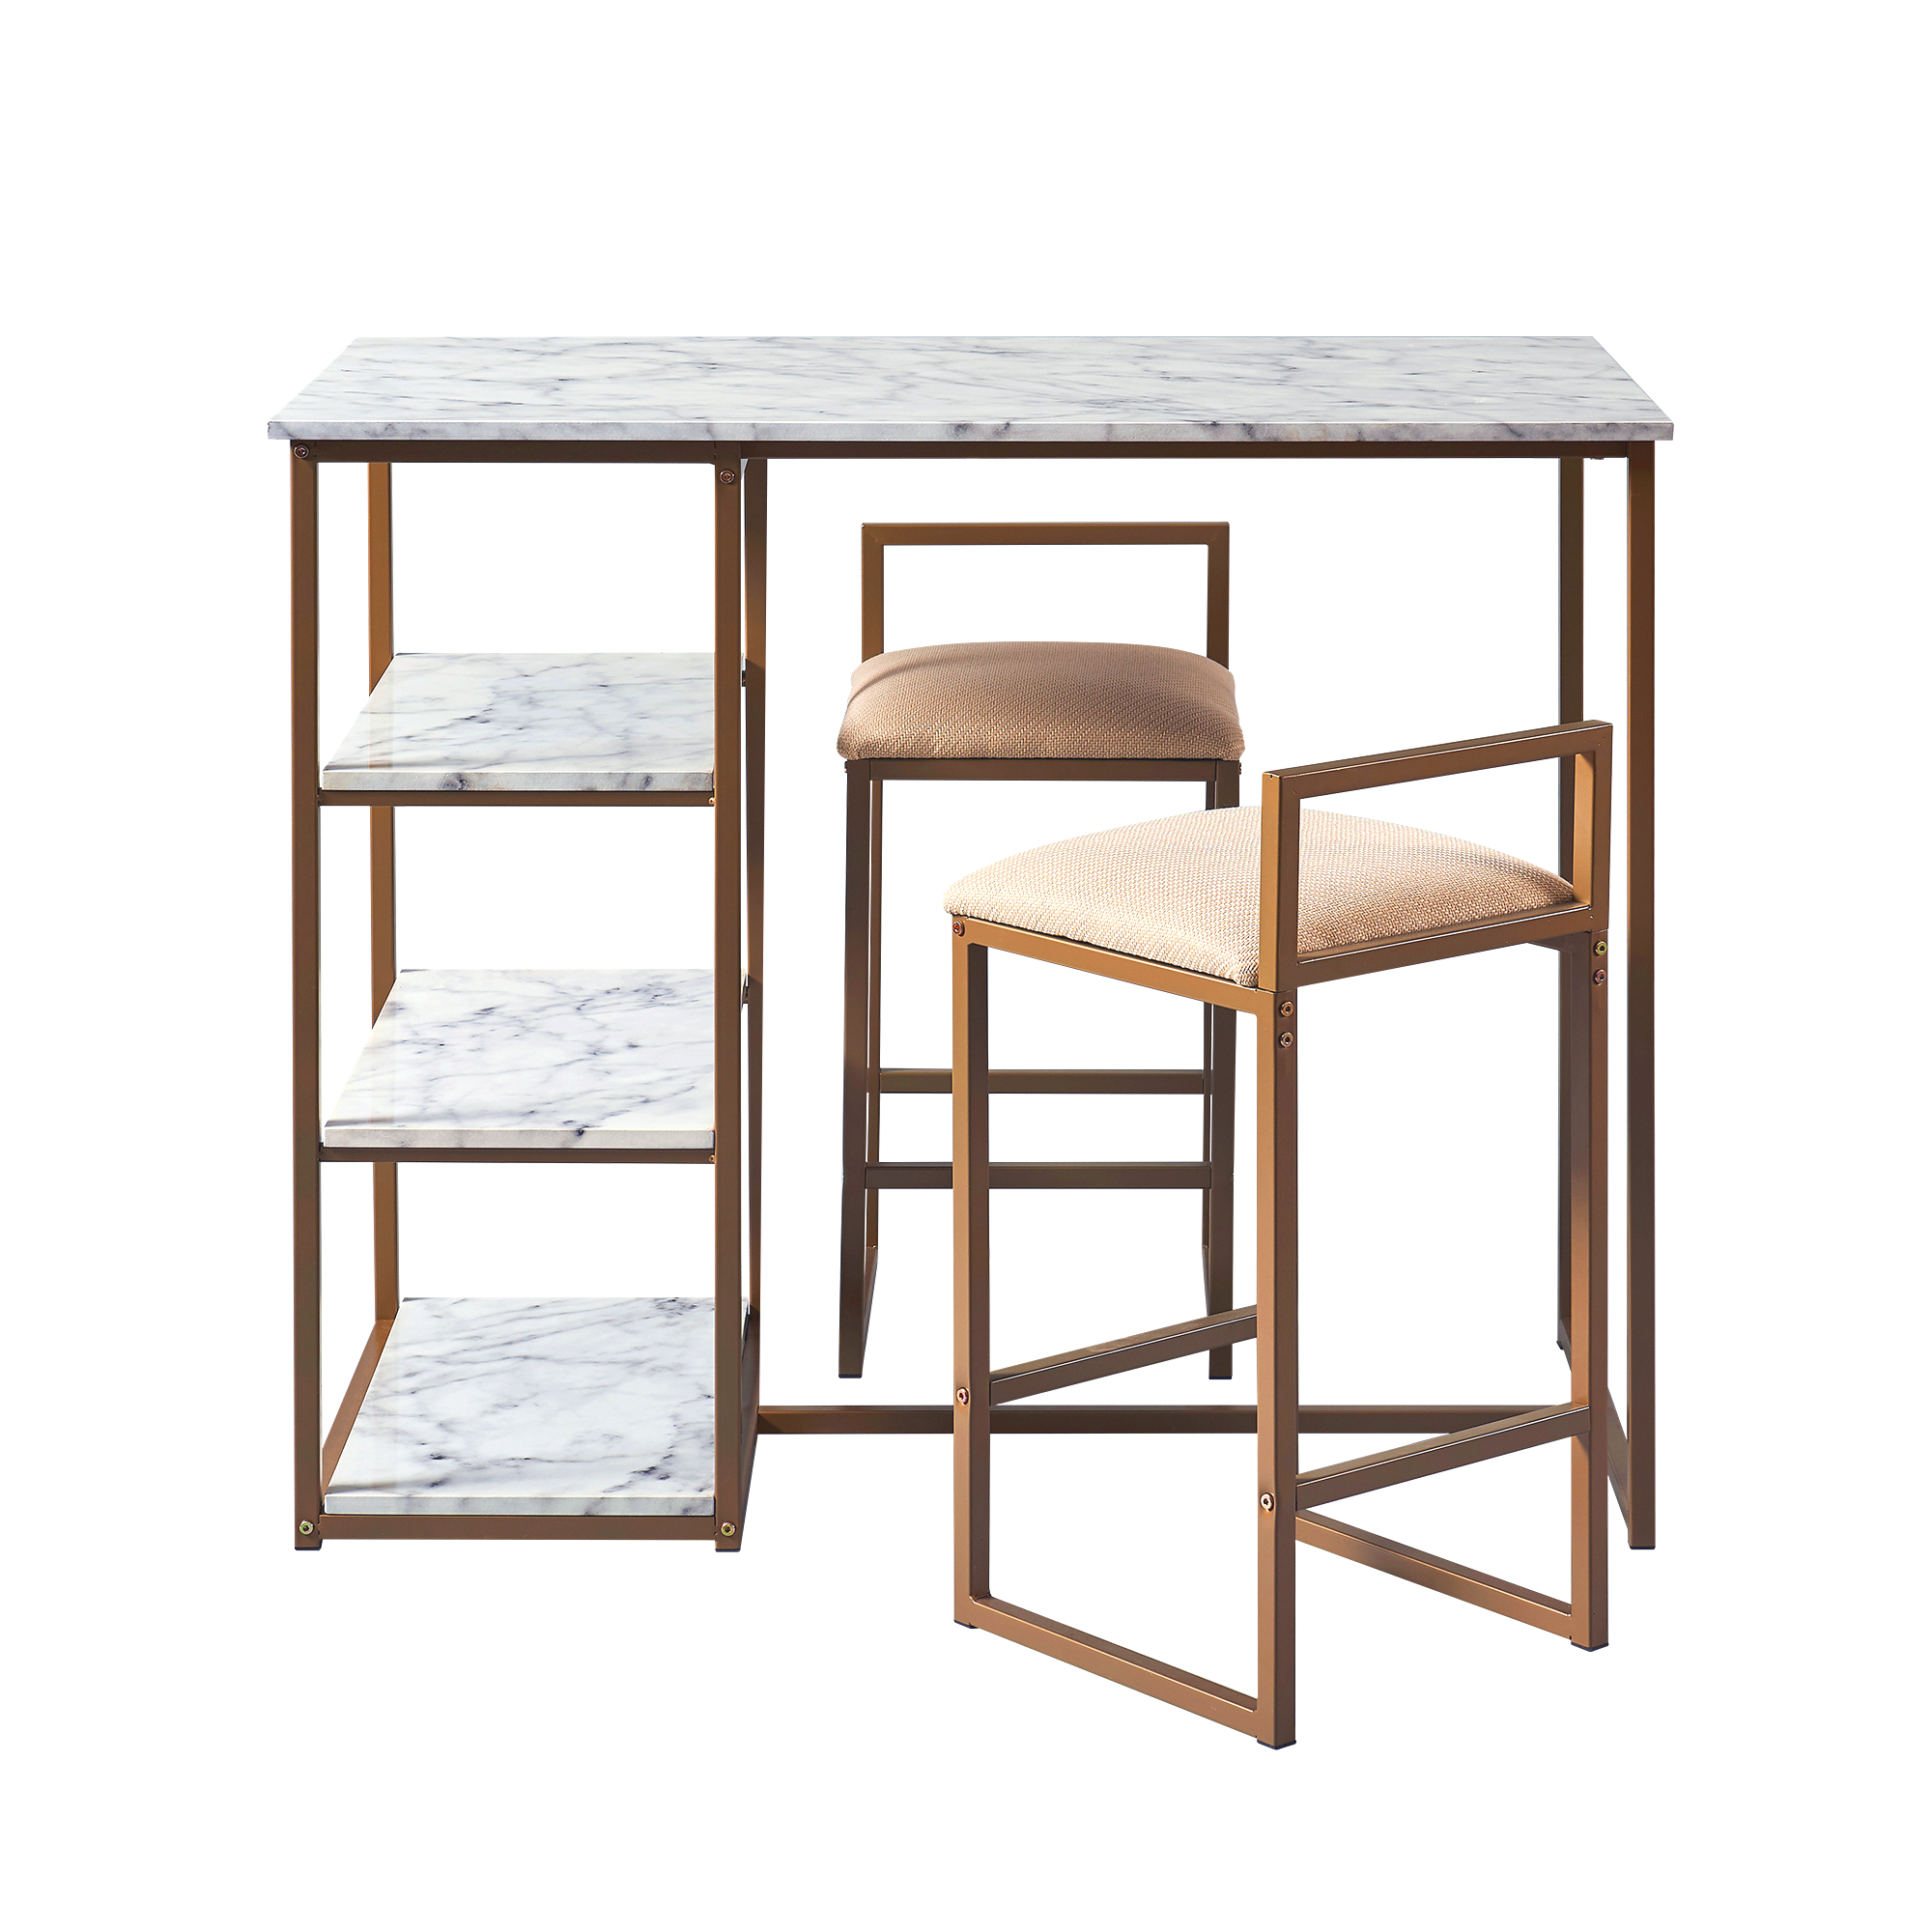 Versanora Marmo Breakfast Dining Set with Faux Marble Top, Brass Finish